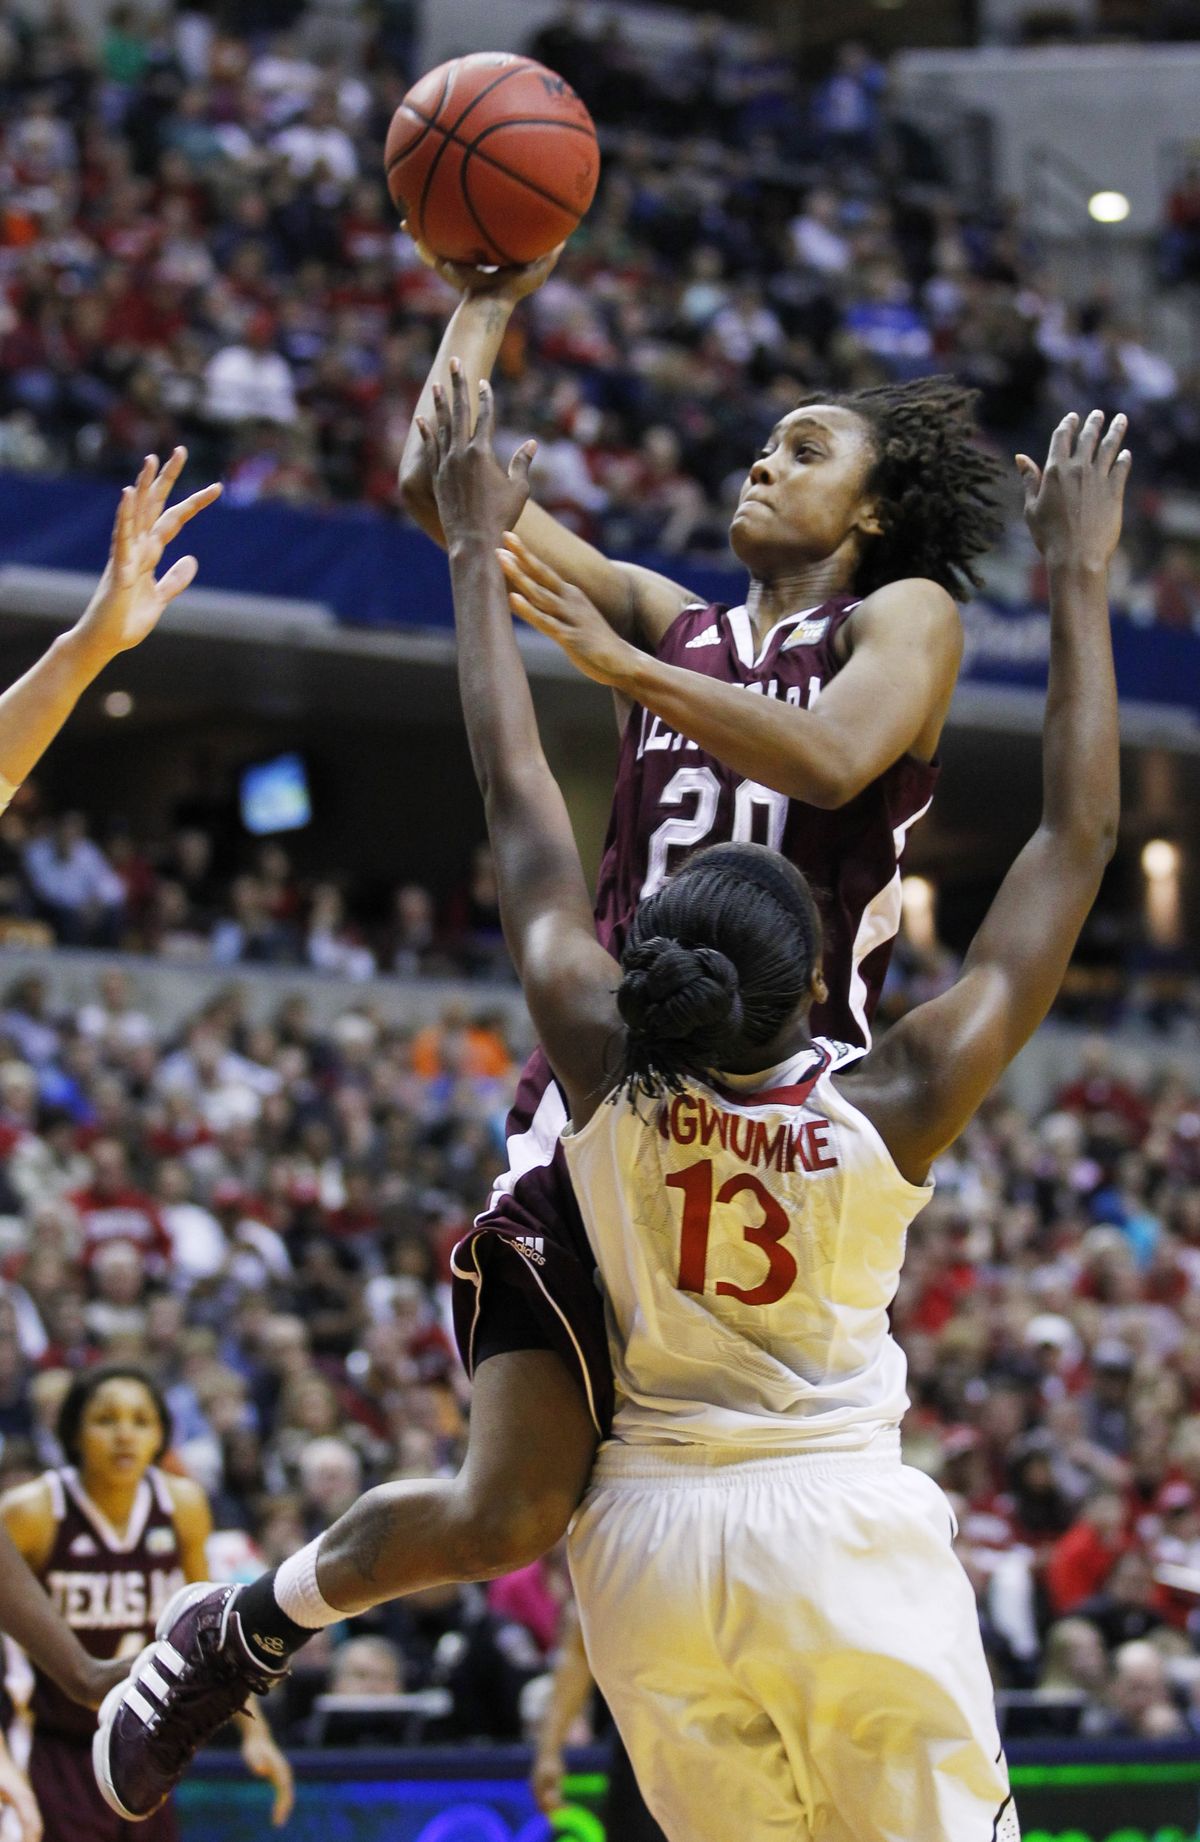 Texas A&M’s Tyra White shoots over Stanford’s Chiney Ogwumike in the second half. (Associated Press)